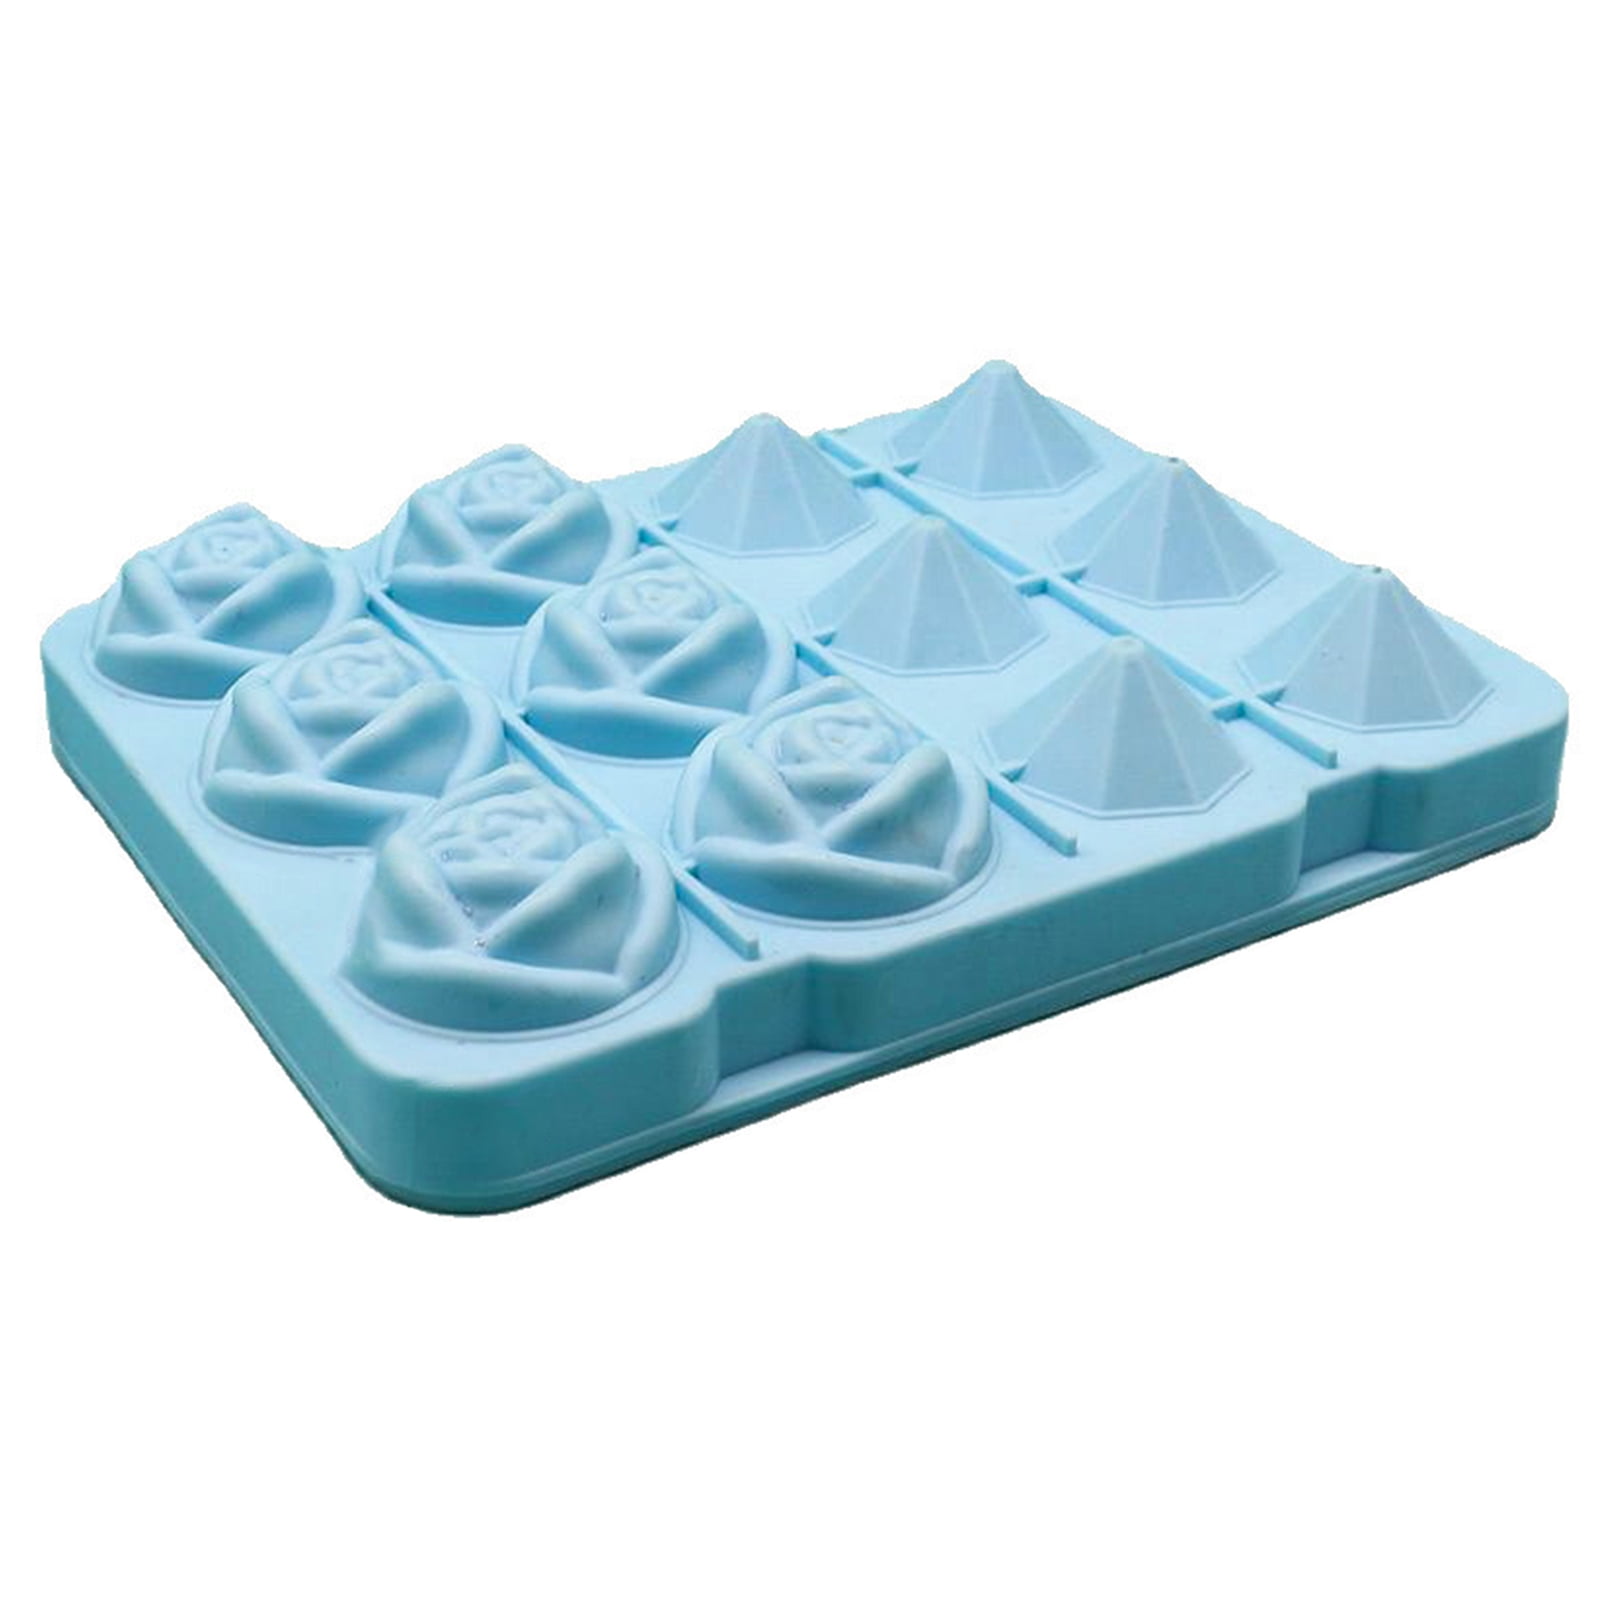 Rubber Ice Cube Tray Distorted Stock Photo 79575052